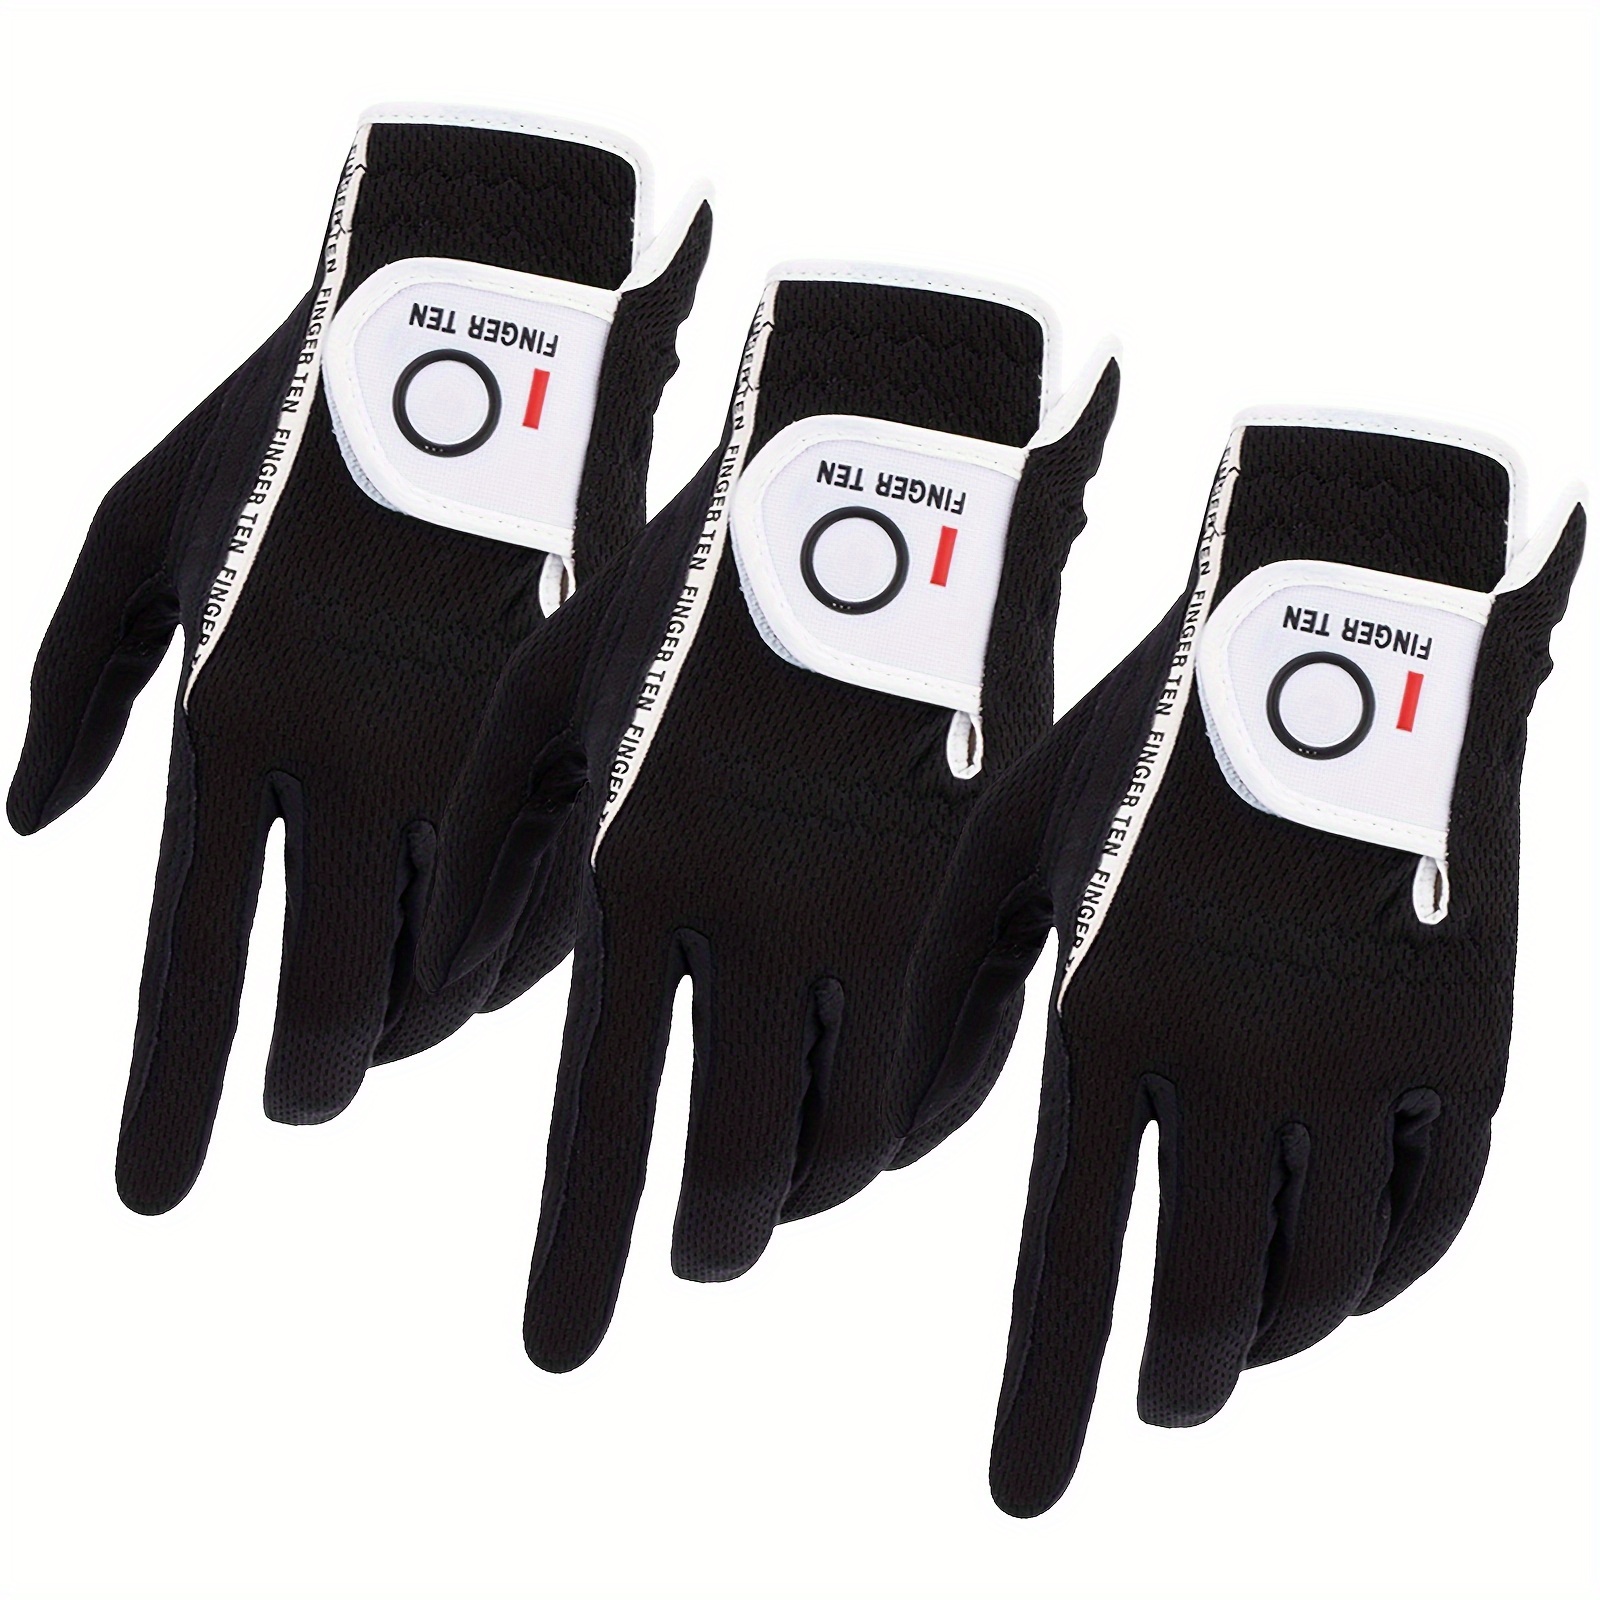 3 pack men's golf gloves for right left handed golfer, all weather performance, s/m/l/xl/xxl black worn on left hand s 0